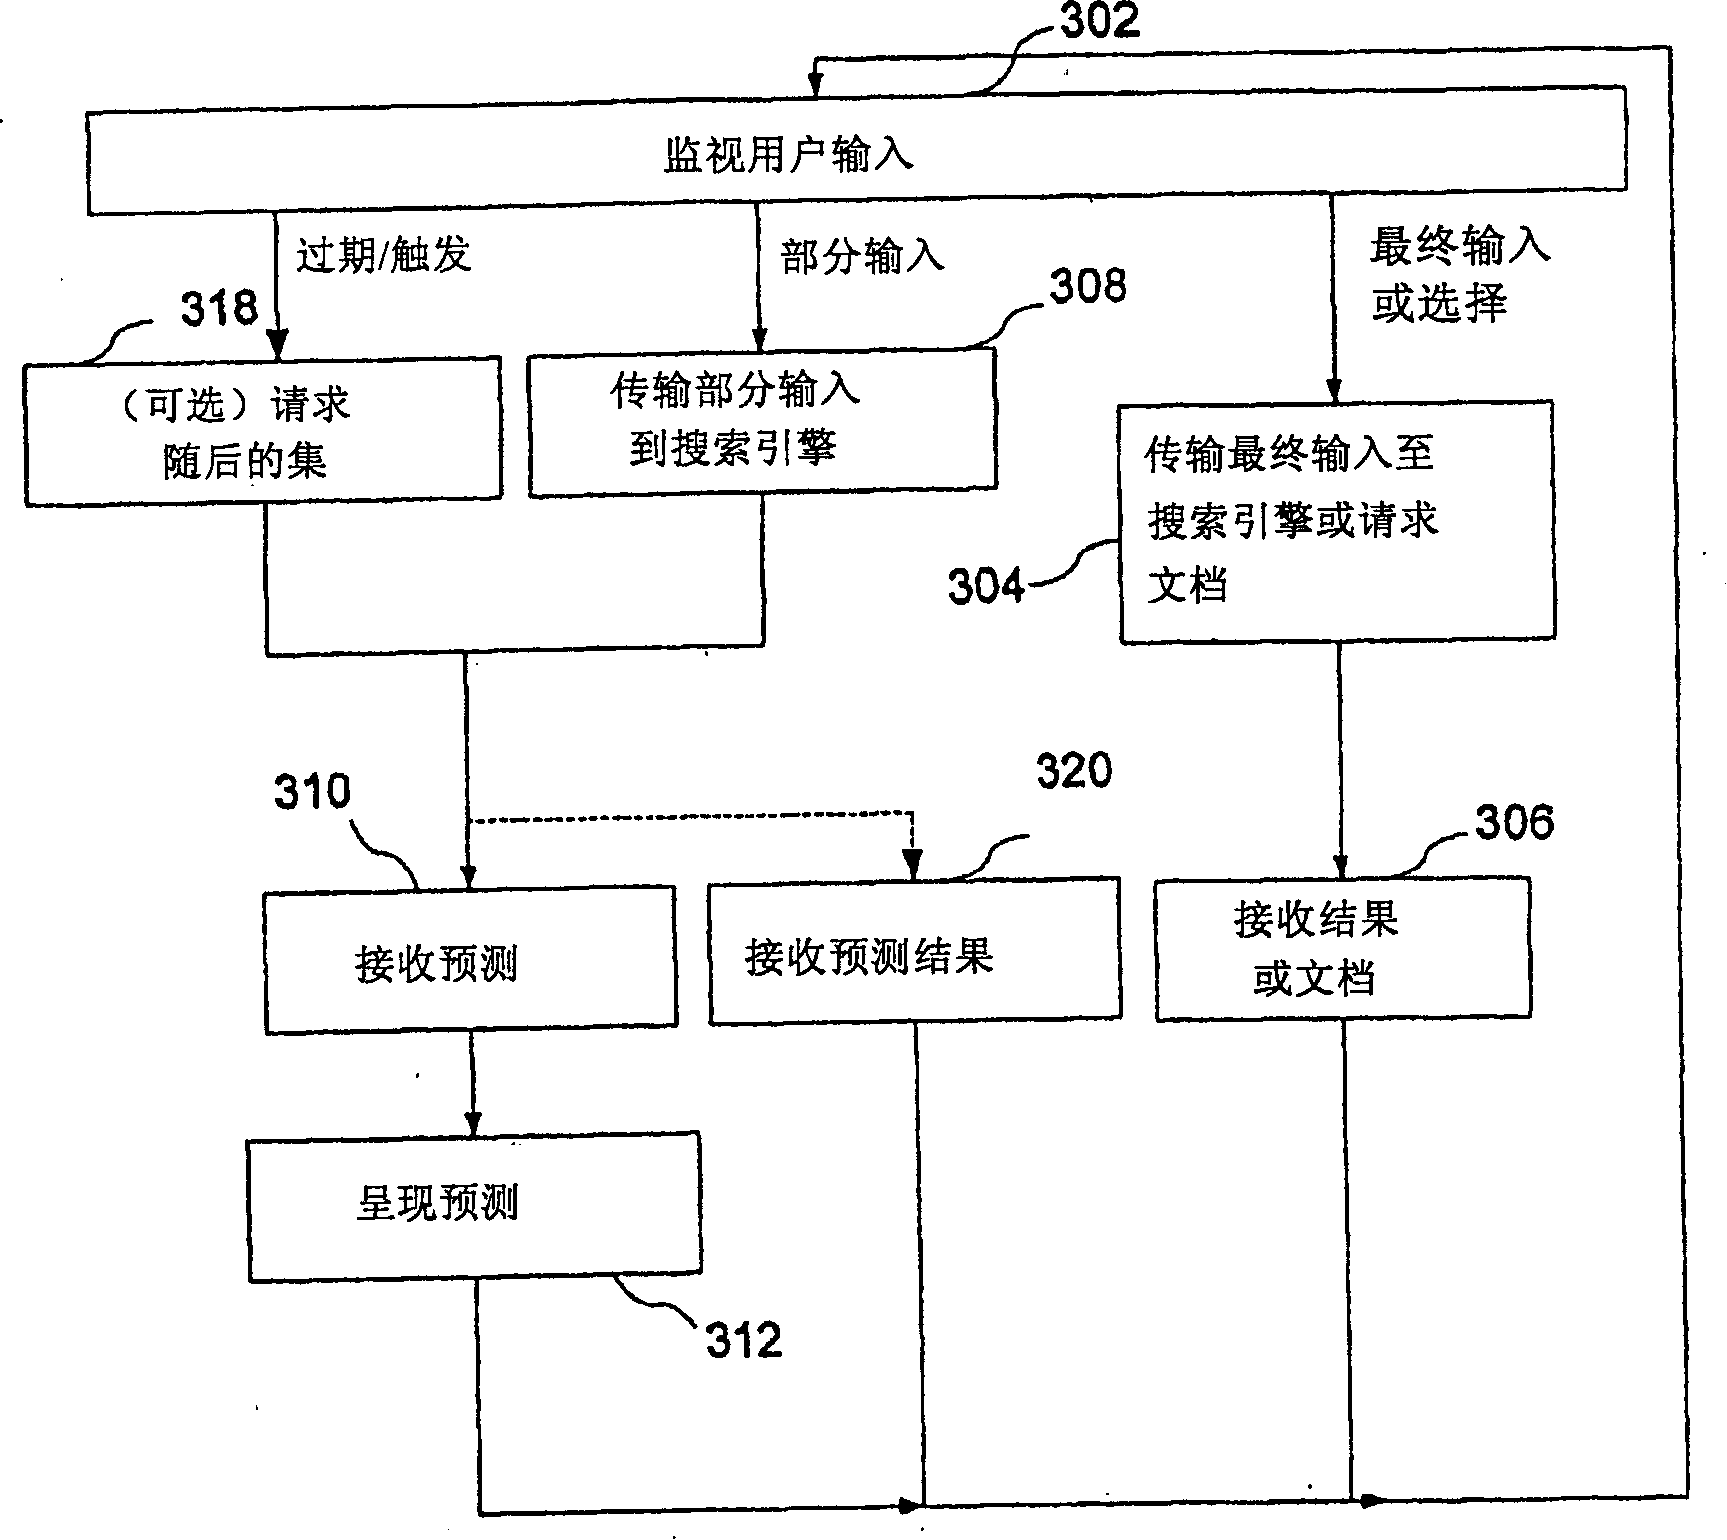 Method and system for autocompletion for languages having ideographs and phonetic characters